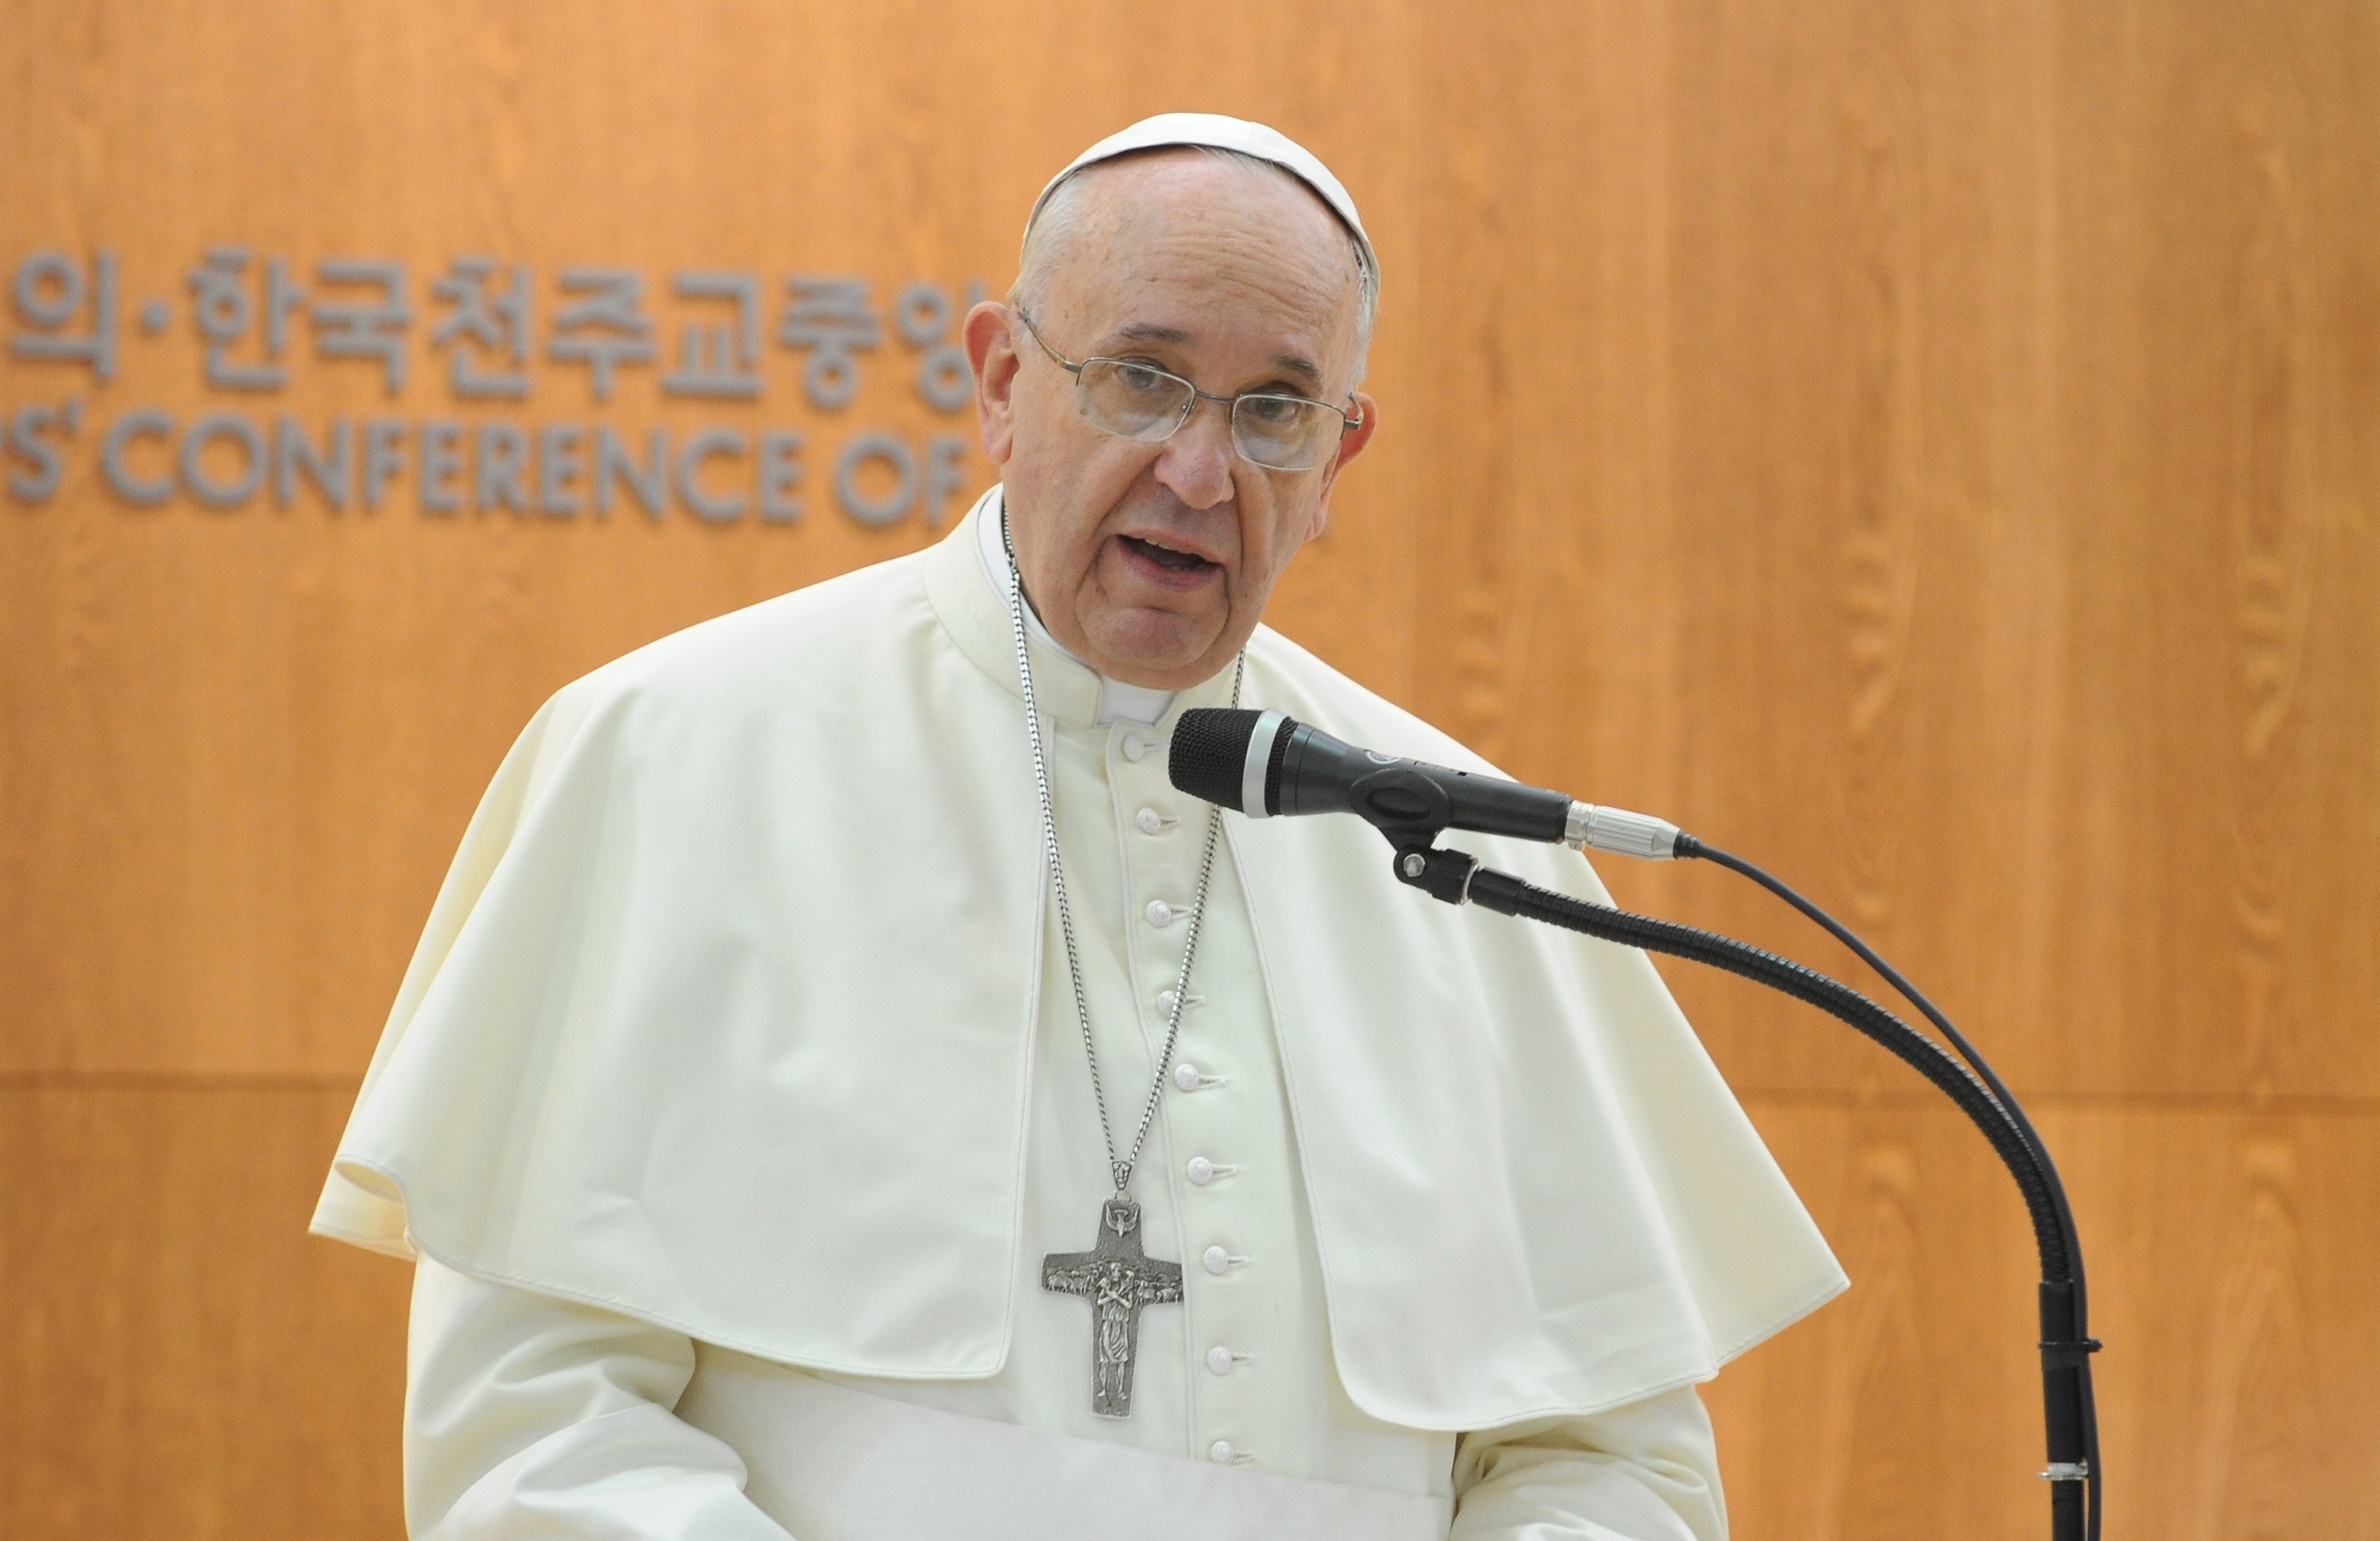 Pope Francis Visits South Korea - DAY 1